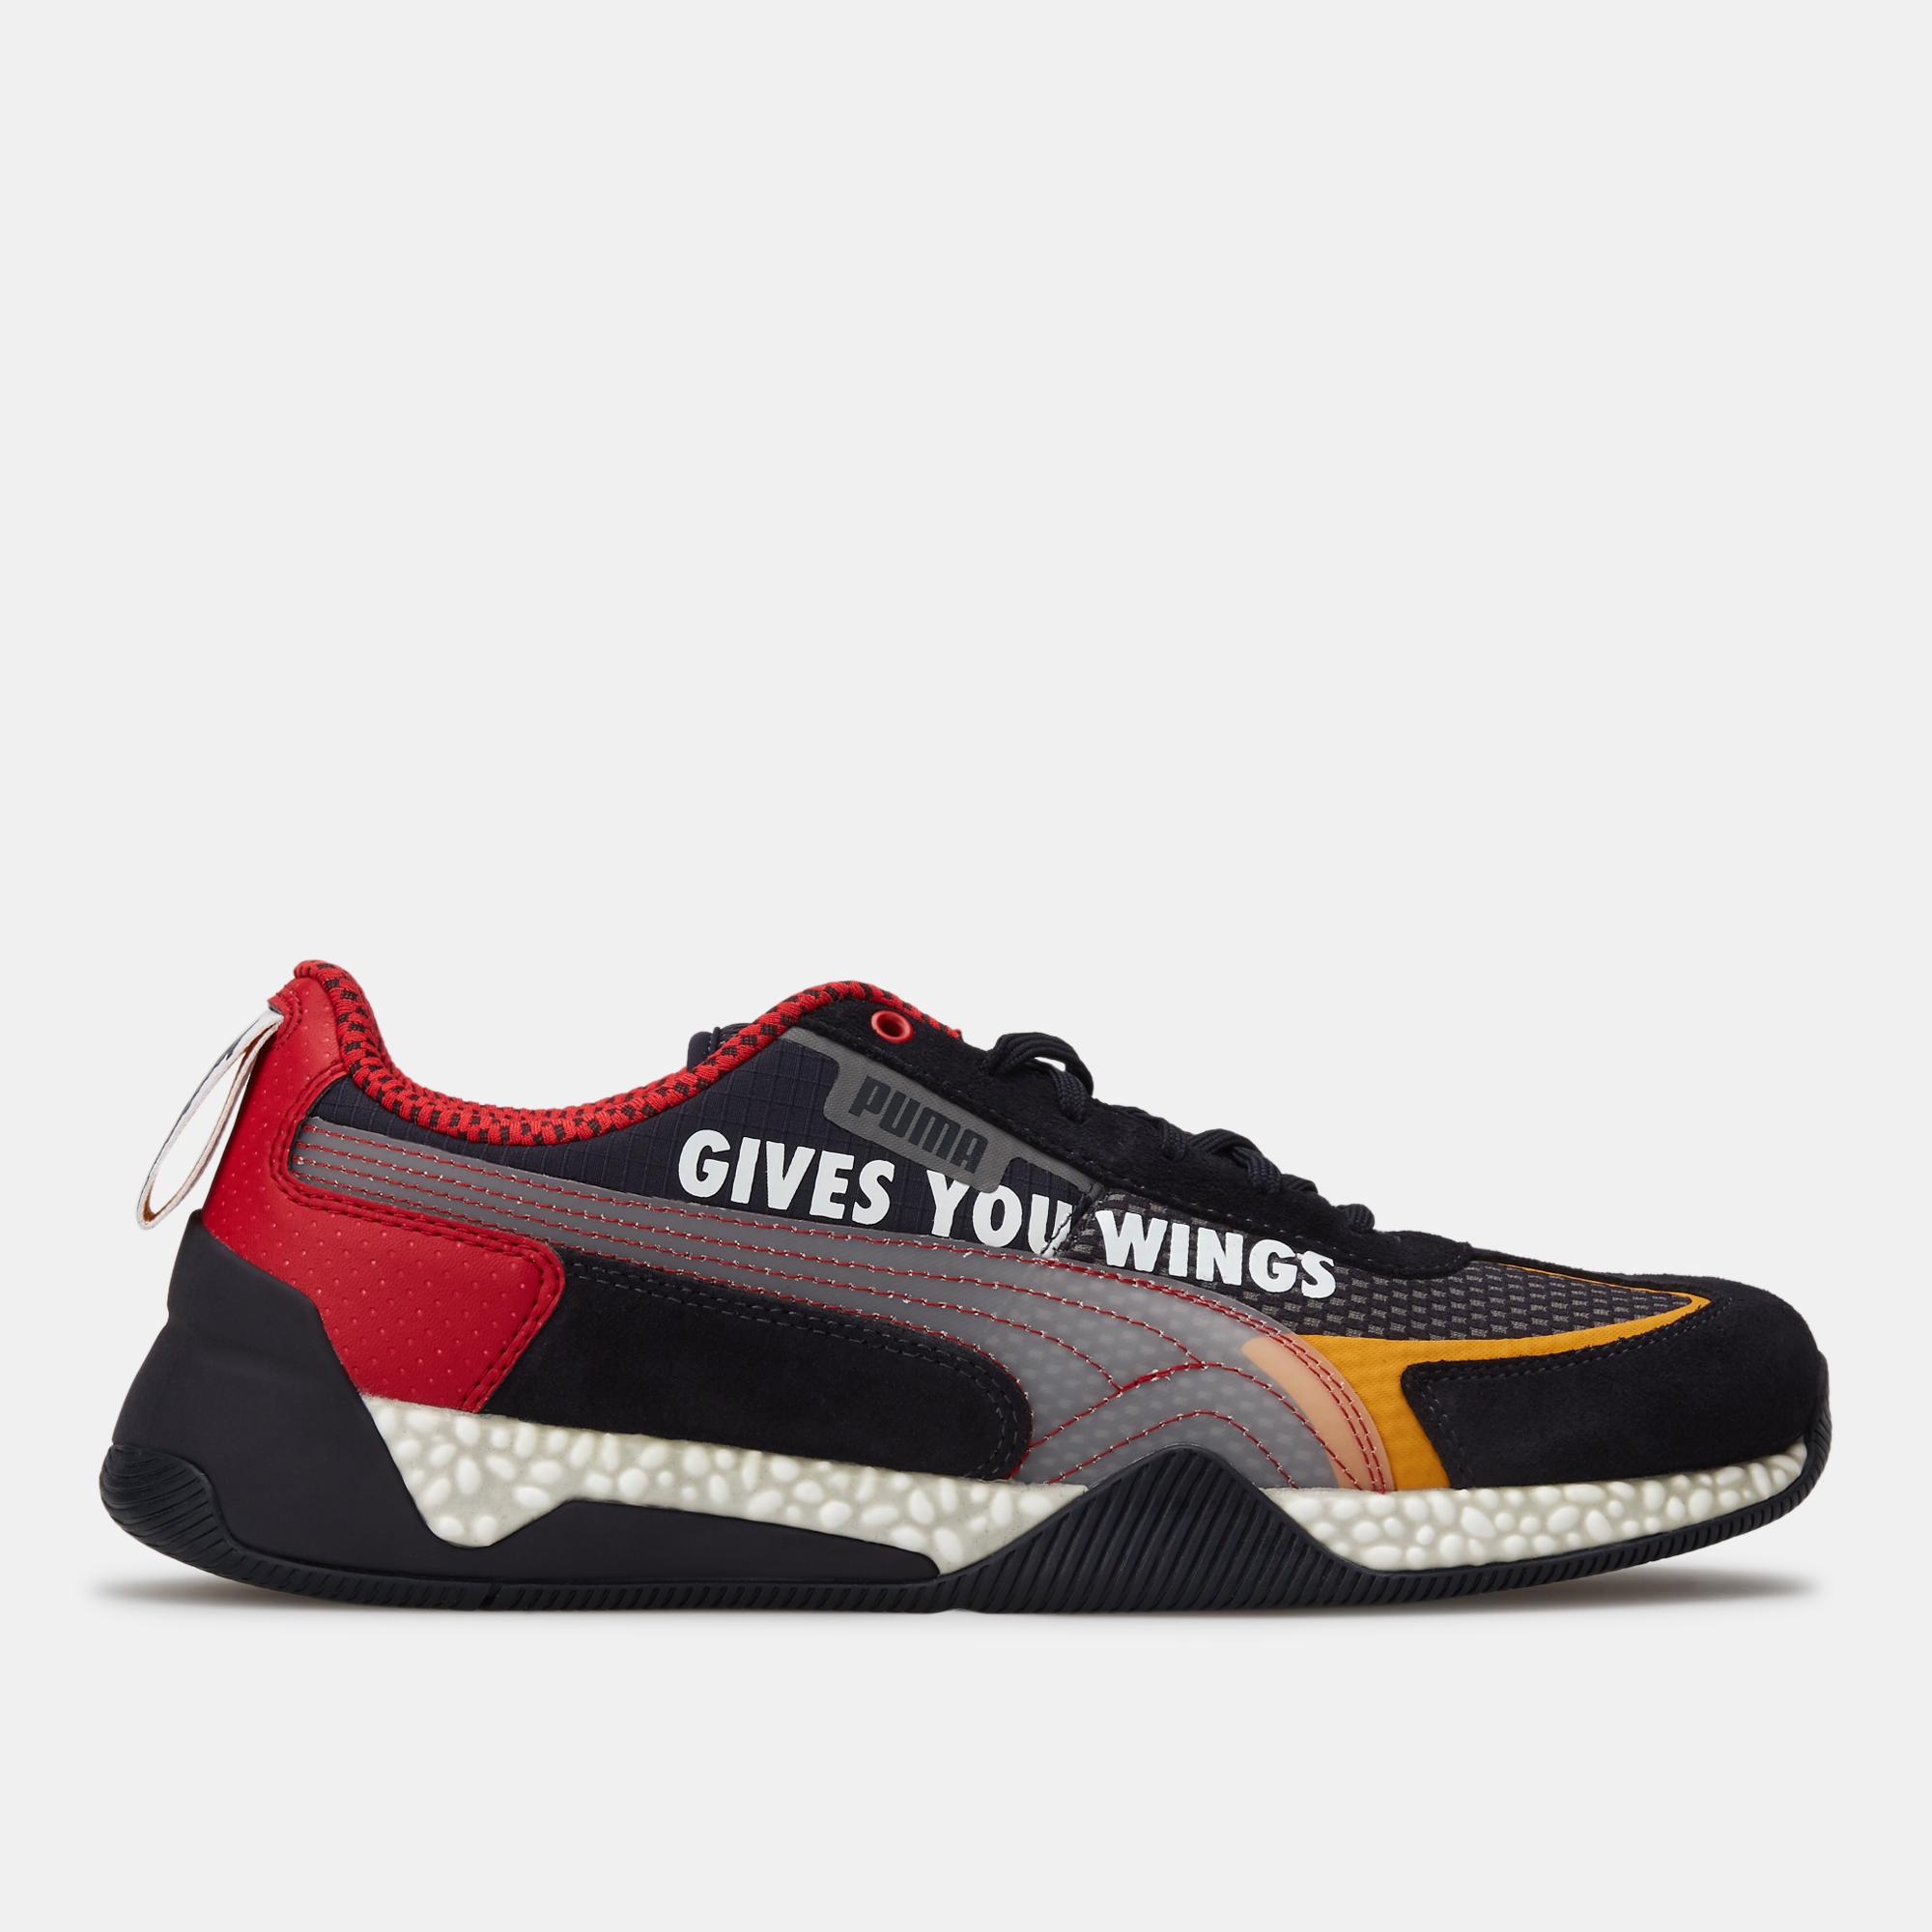 puma red bull shoes online